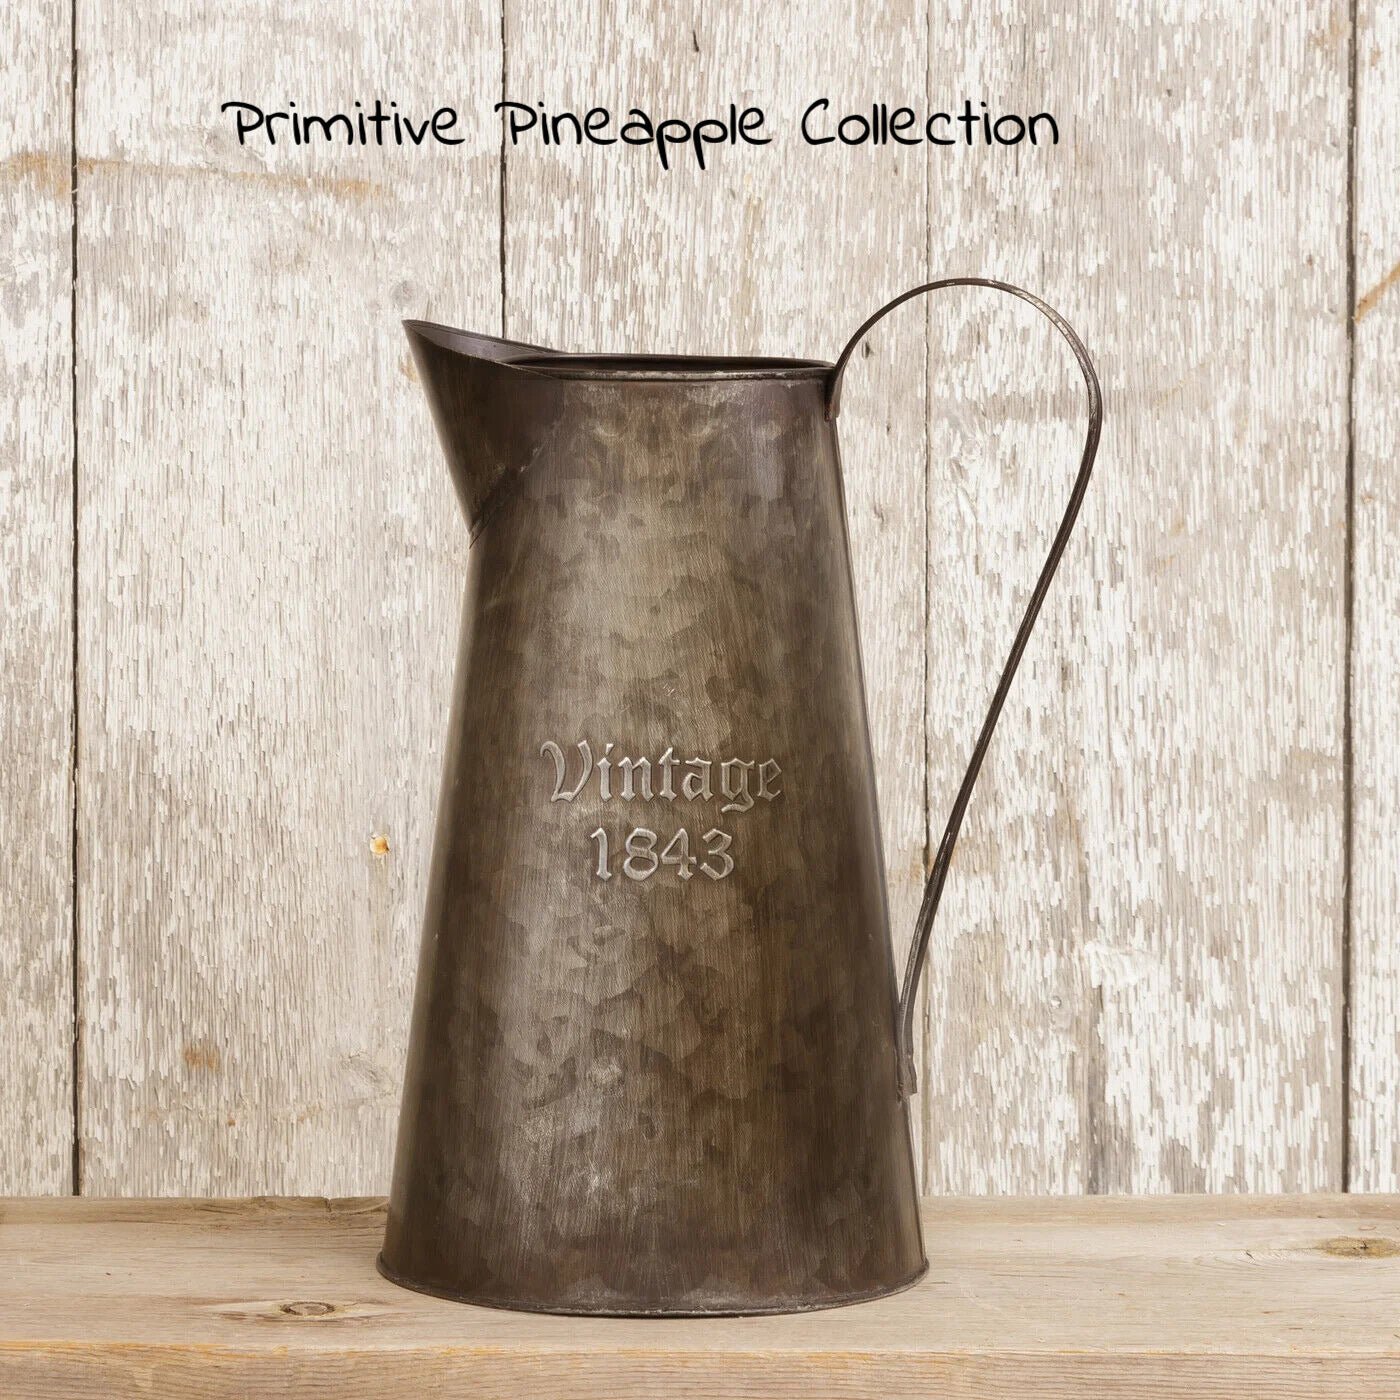 Primitive Colonial Reproduction 1843 Metal Embossed Pitcher 11&quot; Farmhouse Style - The Primitive Pineapple Collection